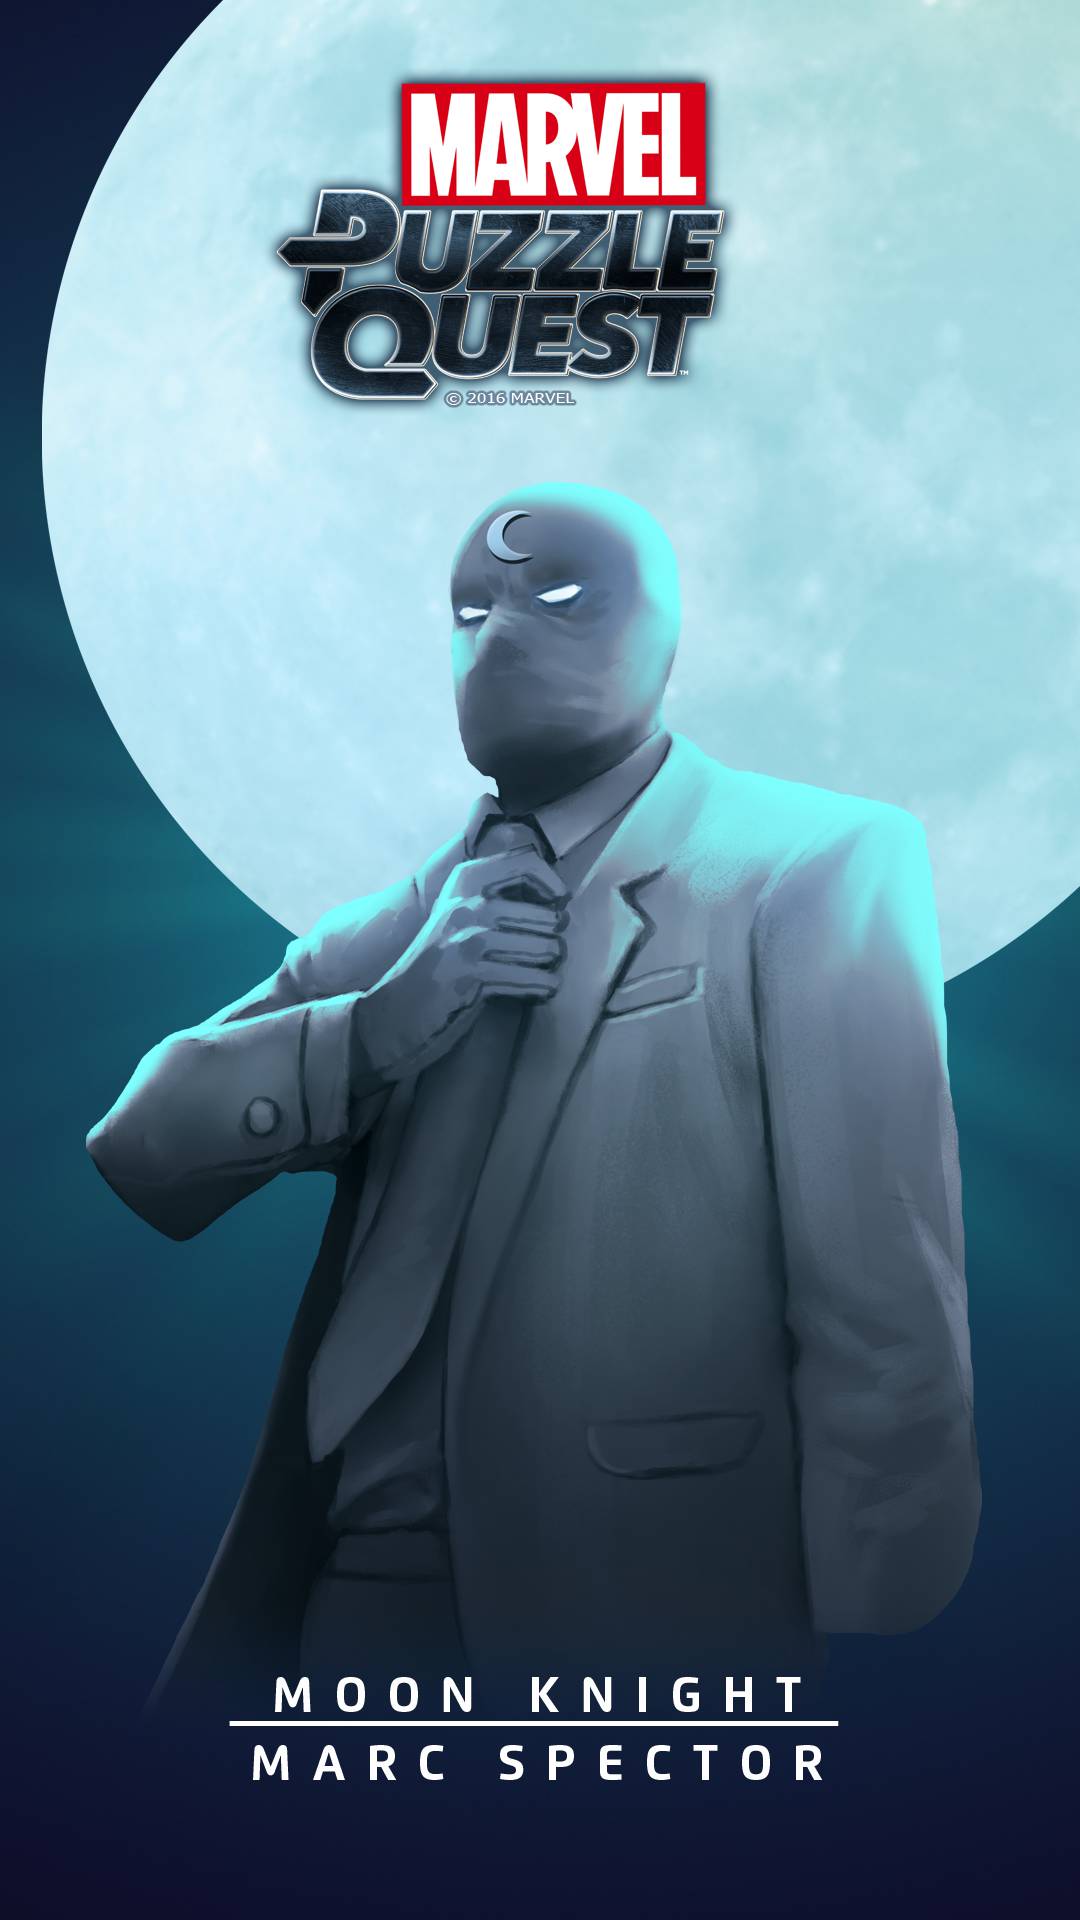 Moon Knight Comes To Marvel Puzzle Quest